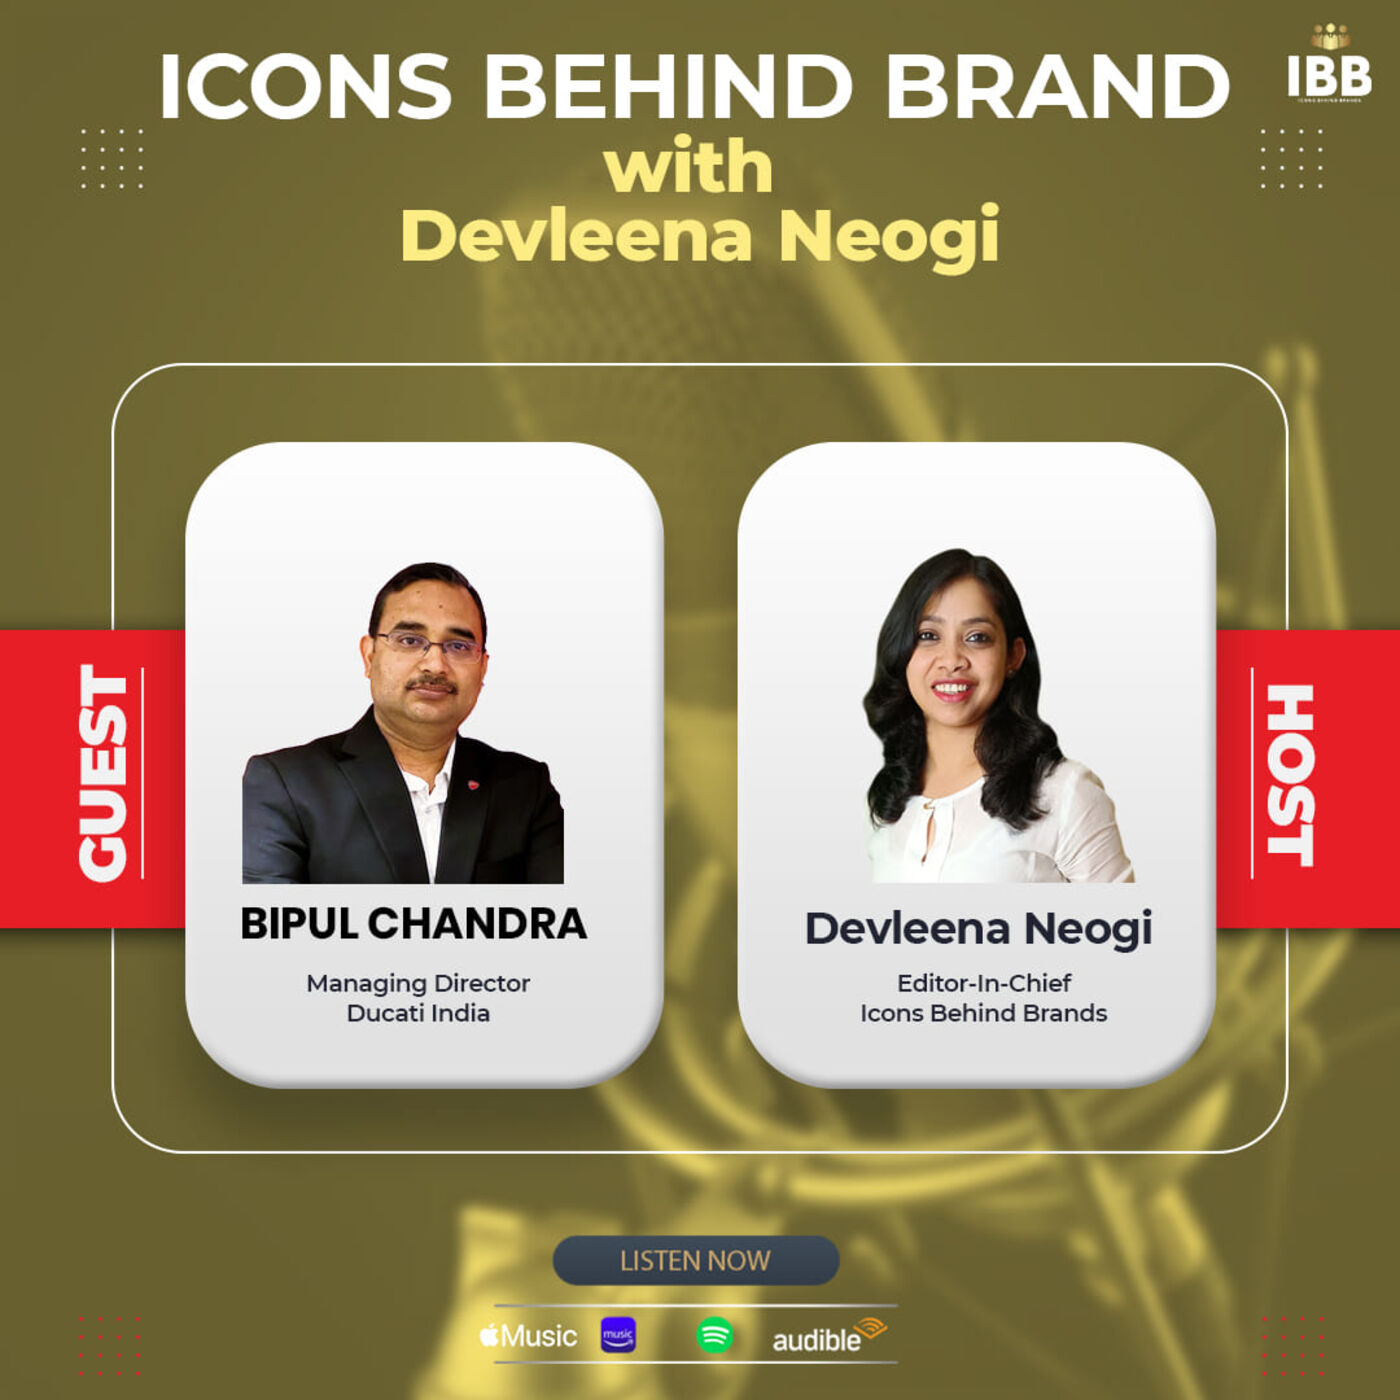 Interview on the expanding the horizon of technology, knowing about cookies with Mr. Bipul Chandra  Managing Director, Ducati India, CXsphere| IBB